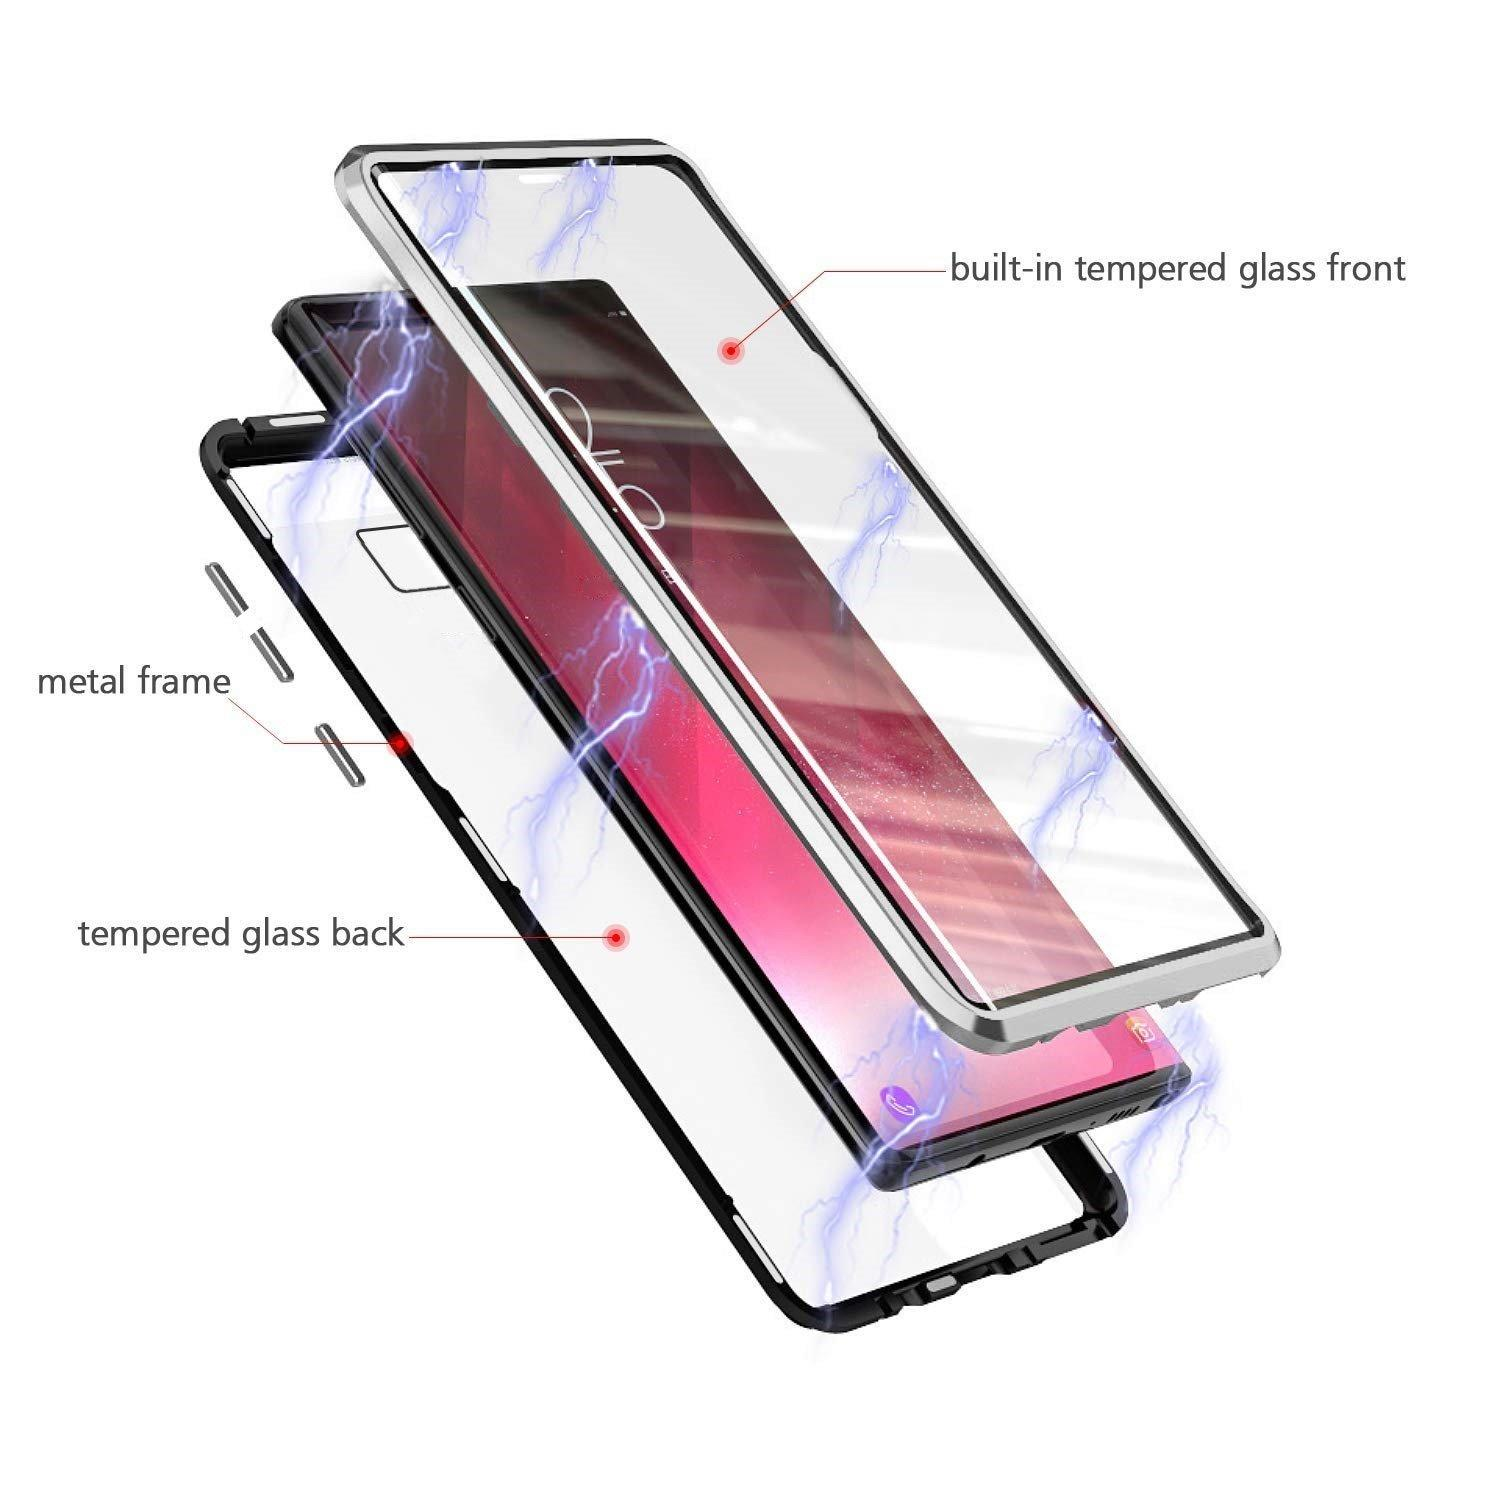 INF Galaxy Full silber S10 Samsung, Cover, Galaxy Plus Plus, S10 Samsung Glas, magnetisch Handyhülle